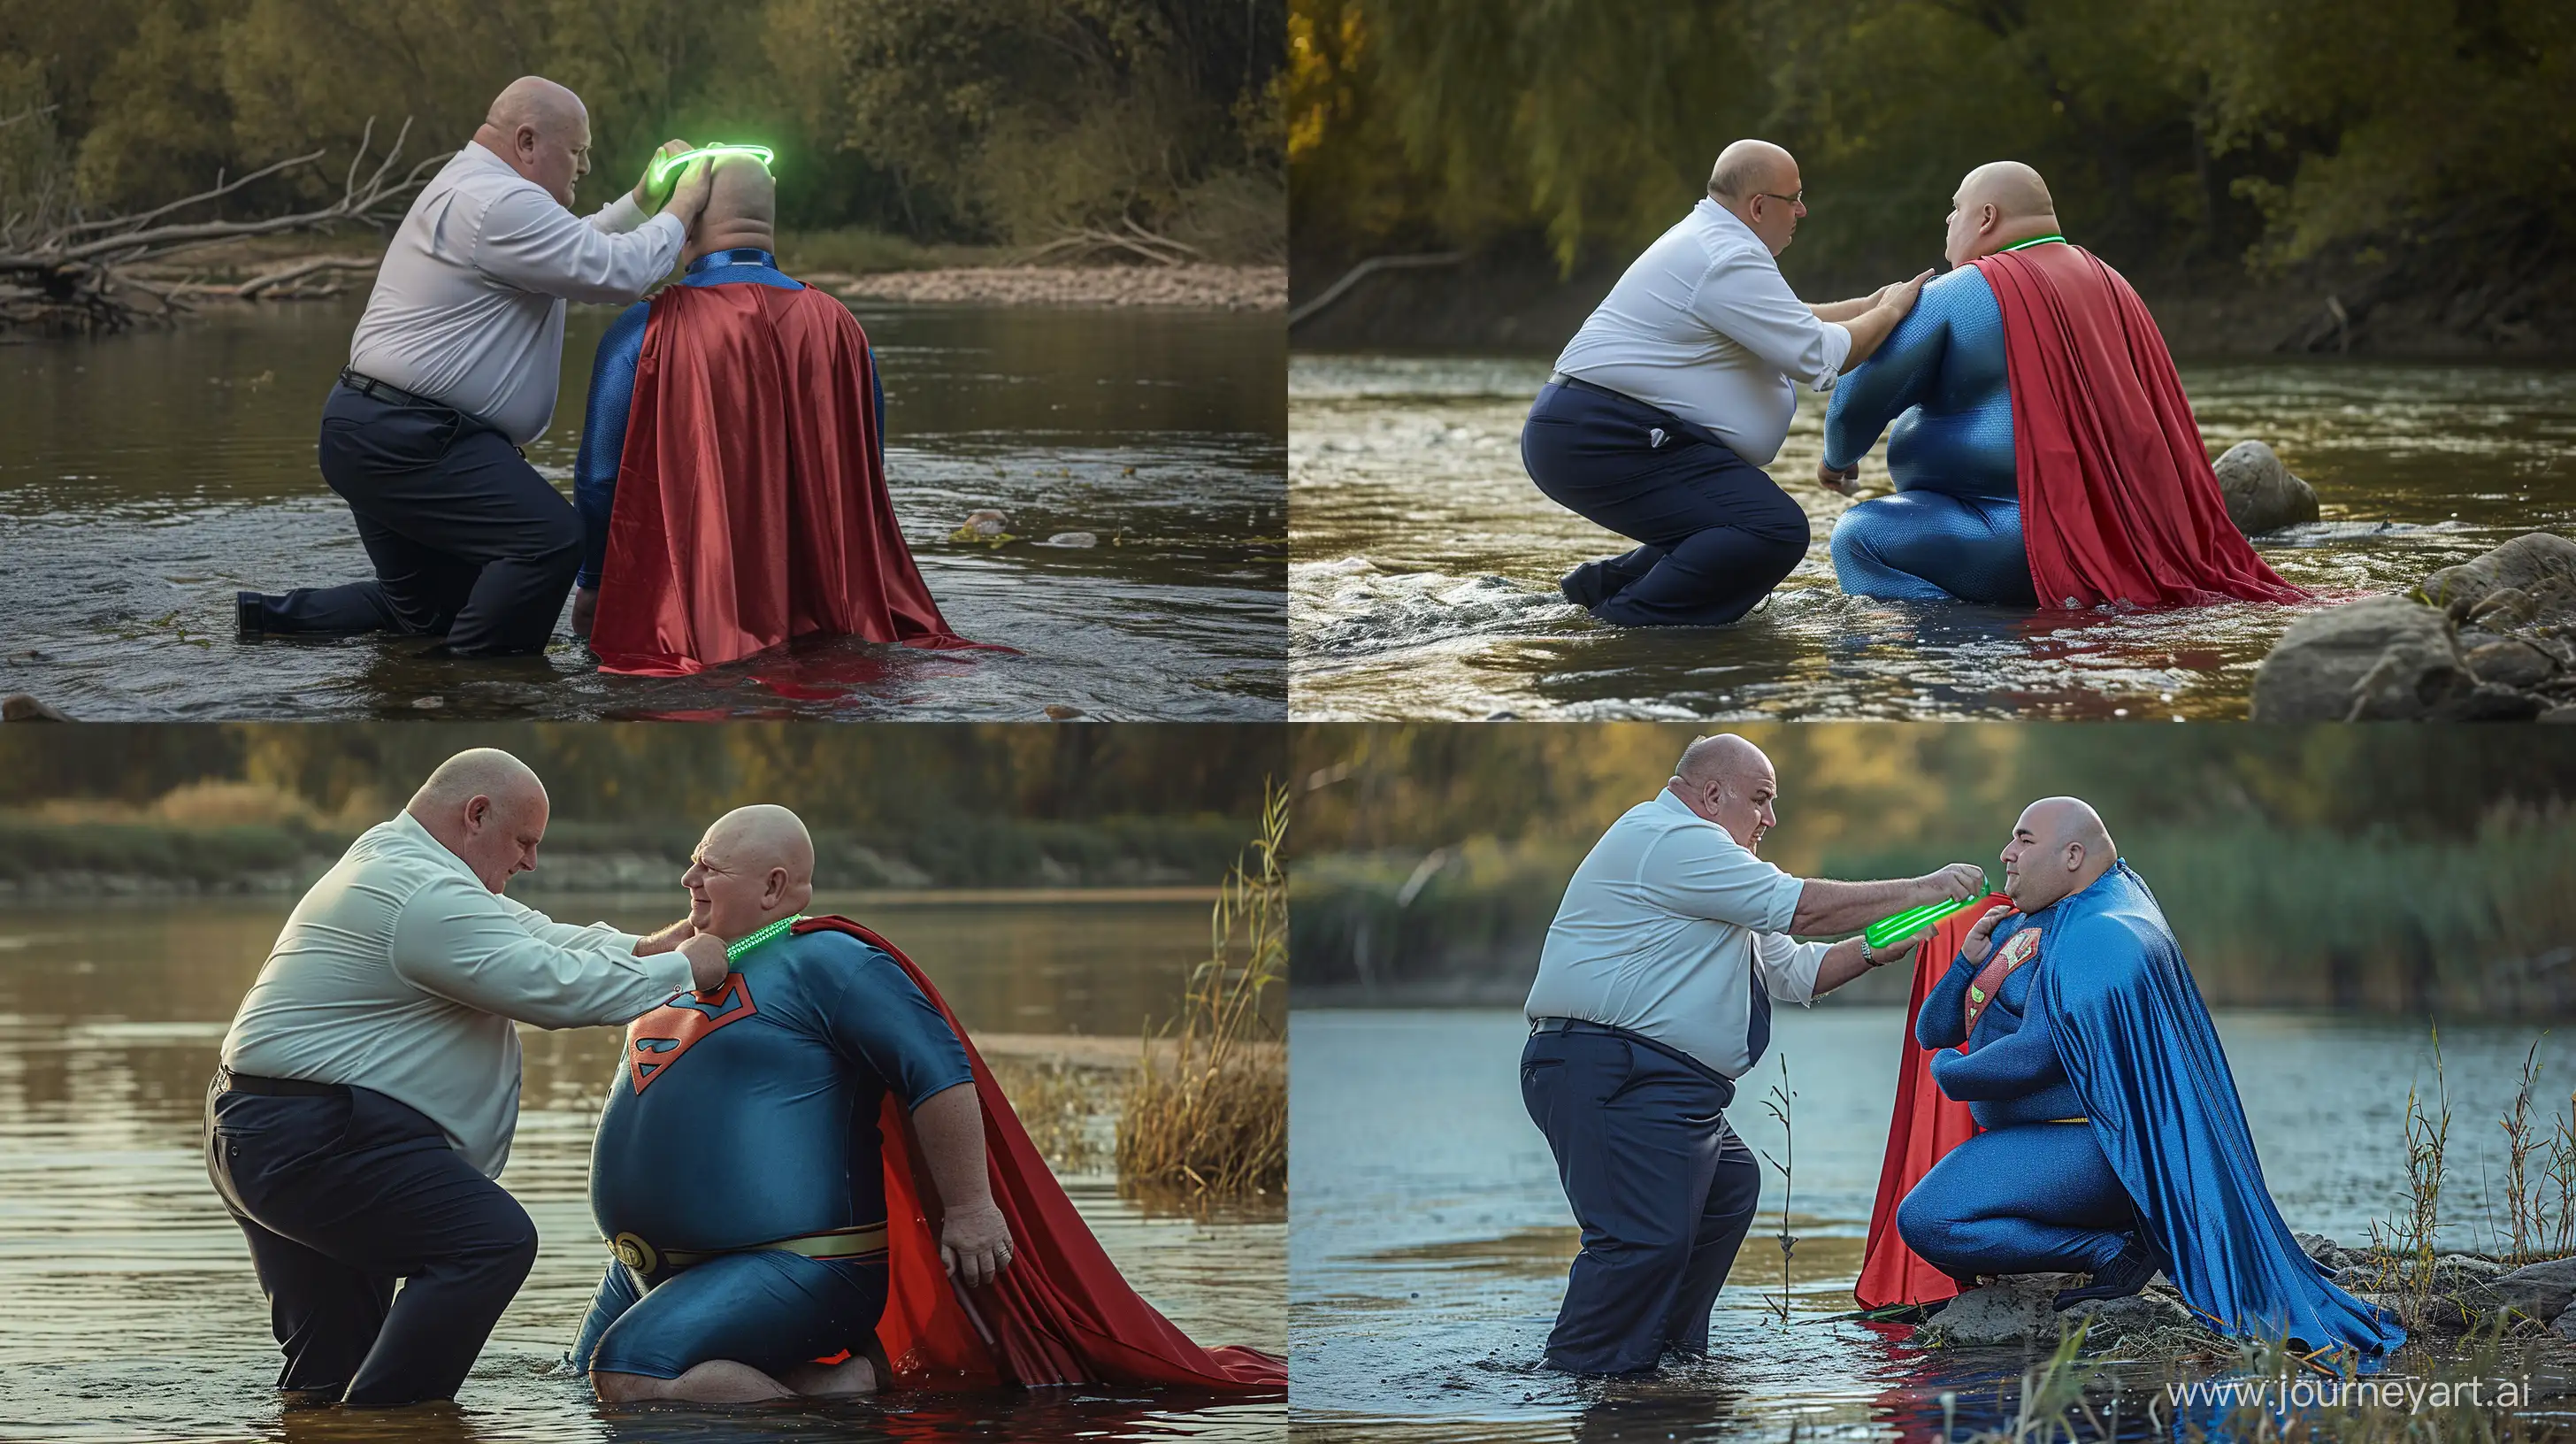 Elderly-Mens-Playful-River-Adventure-with-Glowing-Dog-Collar-and-Superman-Costume